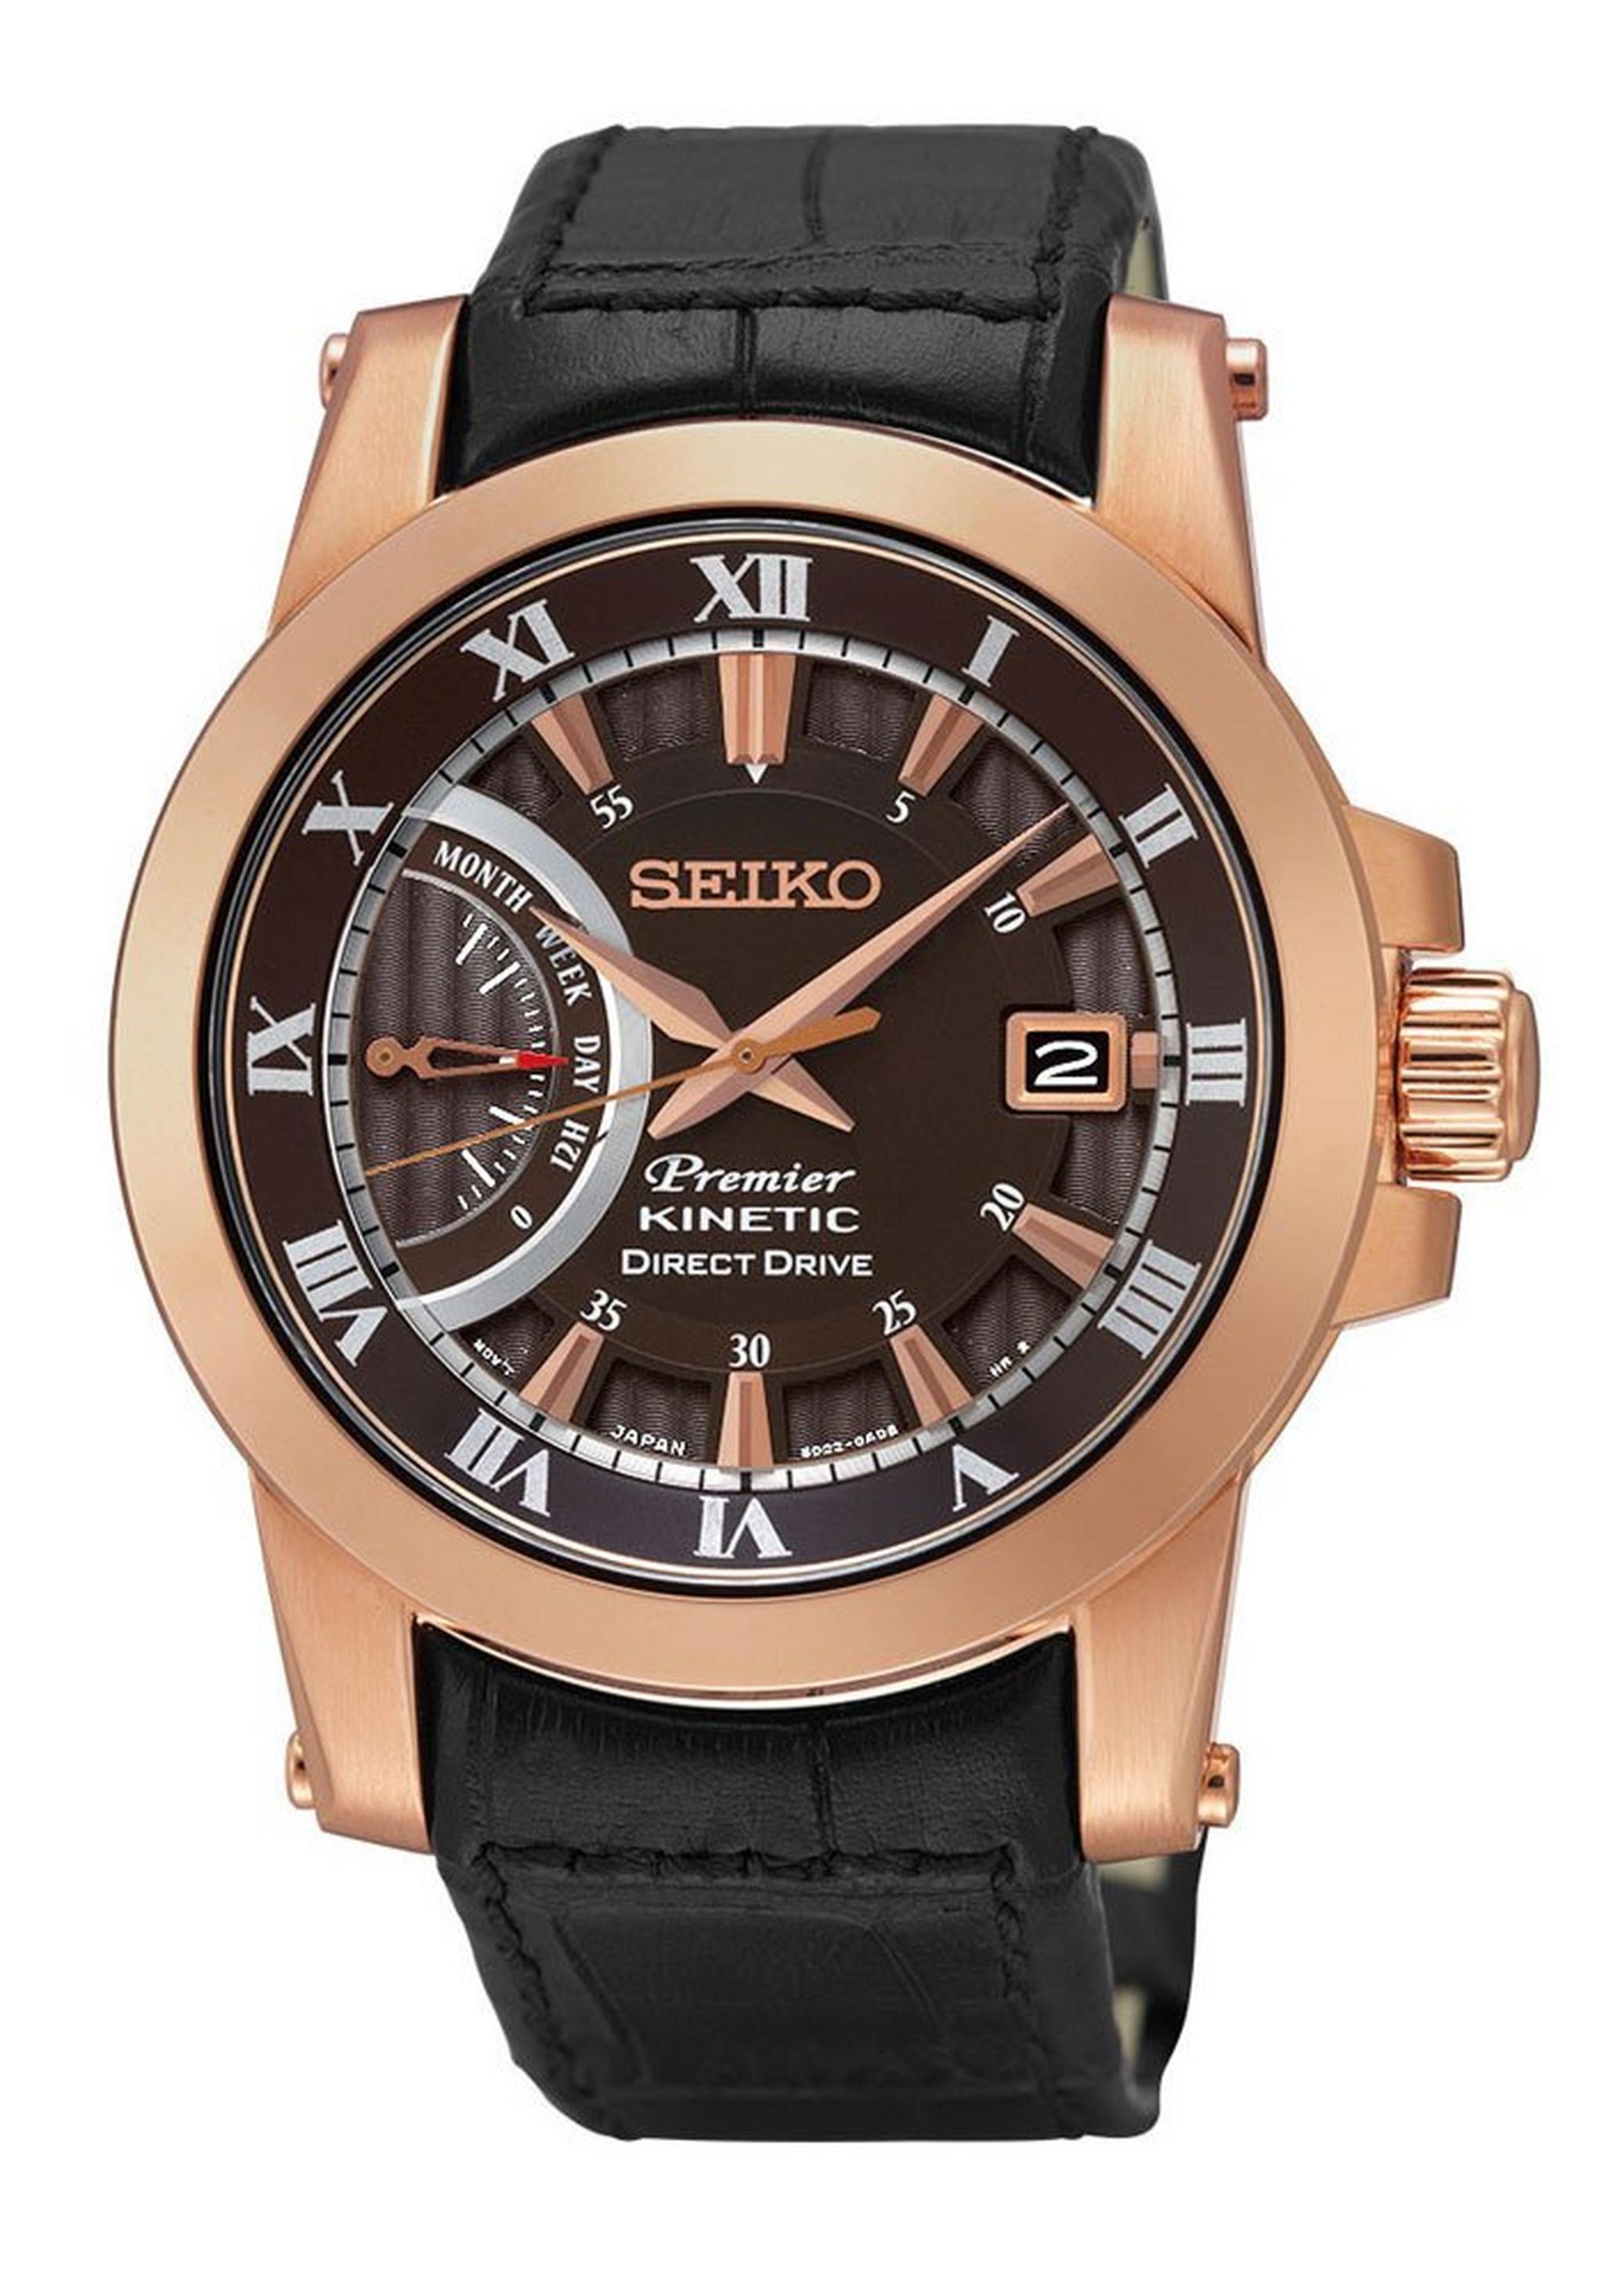 Seiko RG016 Gents Watch - Leather Strap